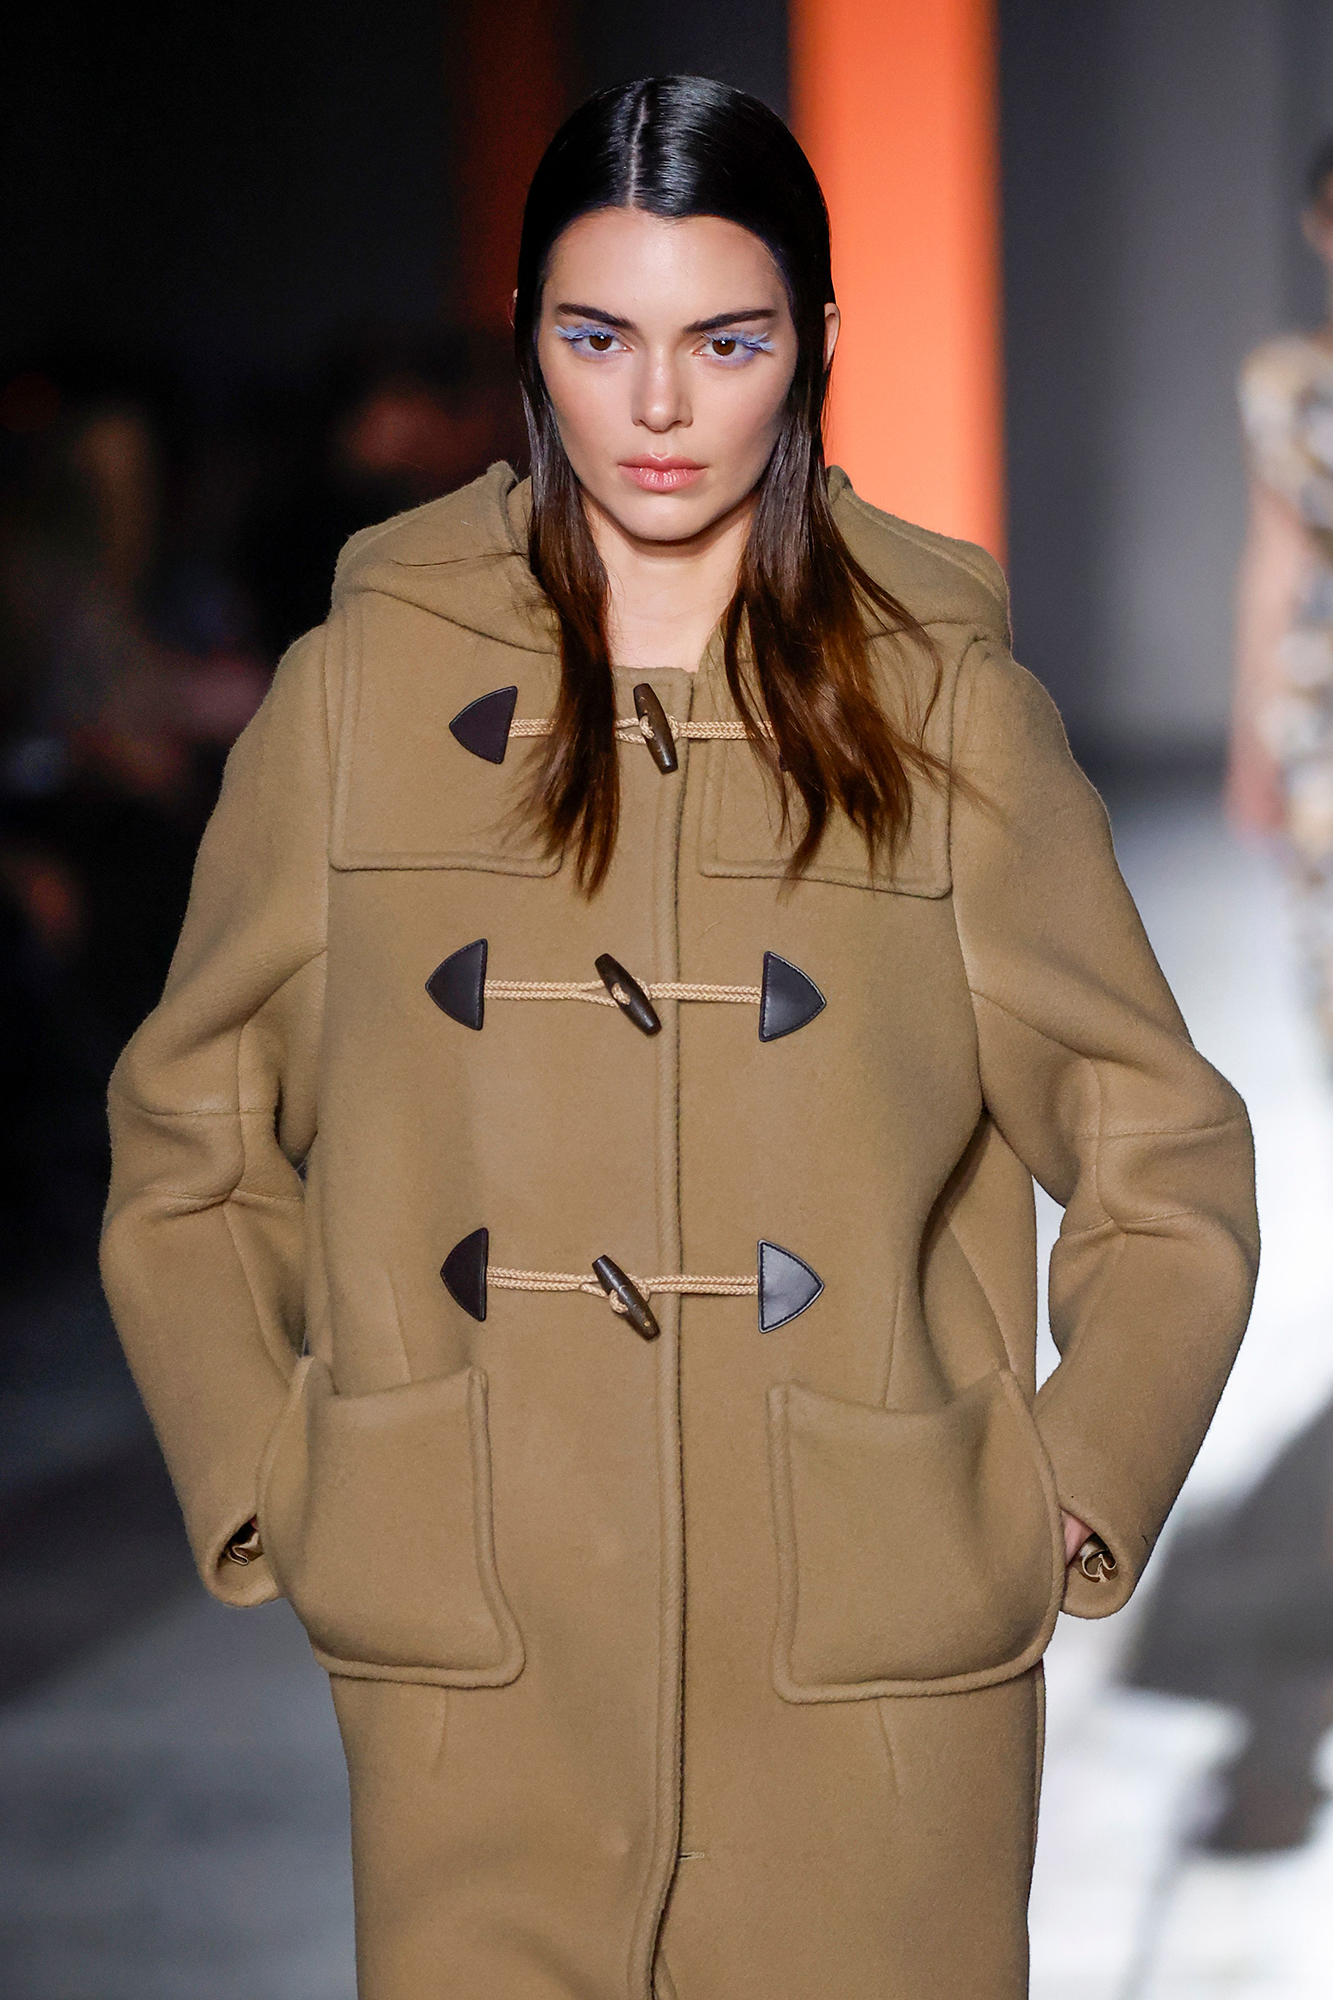 Hunter Schafer and Kendall Jenner just walked Prada's standout AW22 show